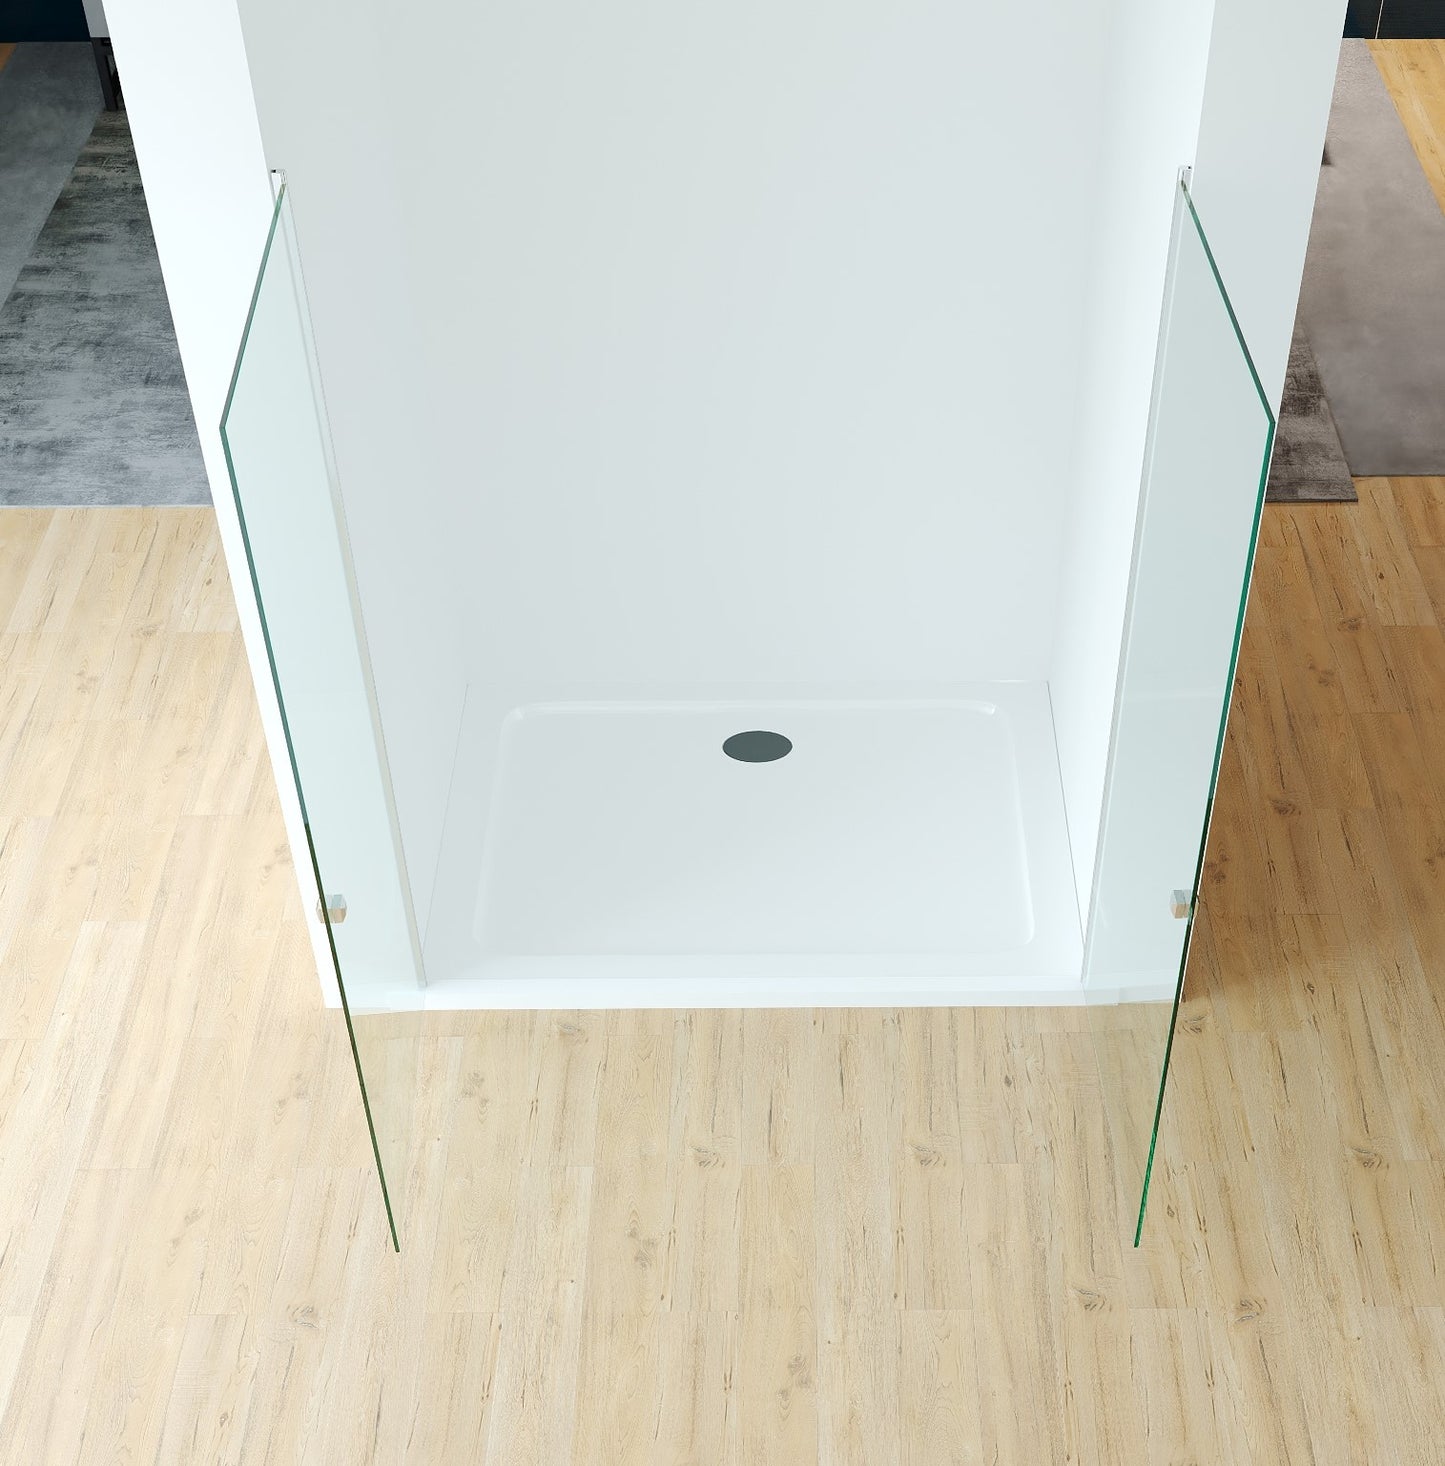 GlasHomeCenter - niche cabin Texas (185 x 195 cm) - 8mm toughened safety glass - without shower tray